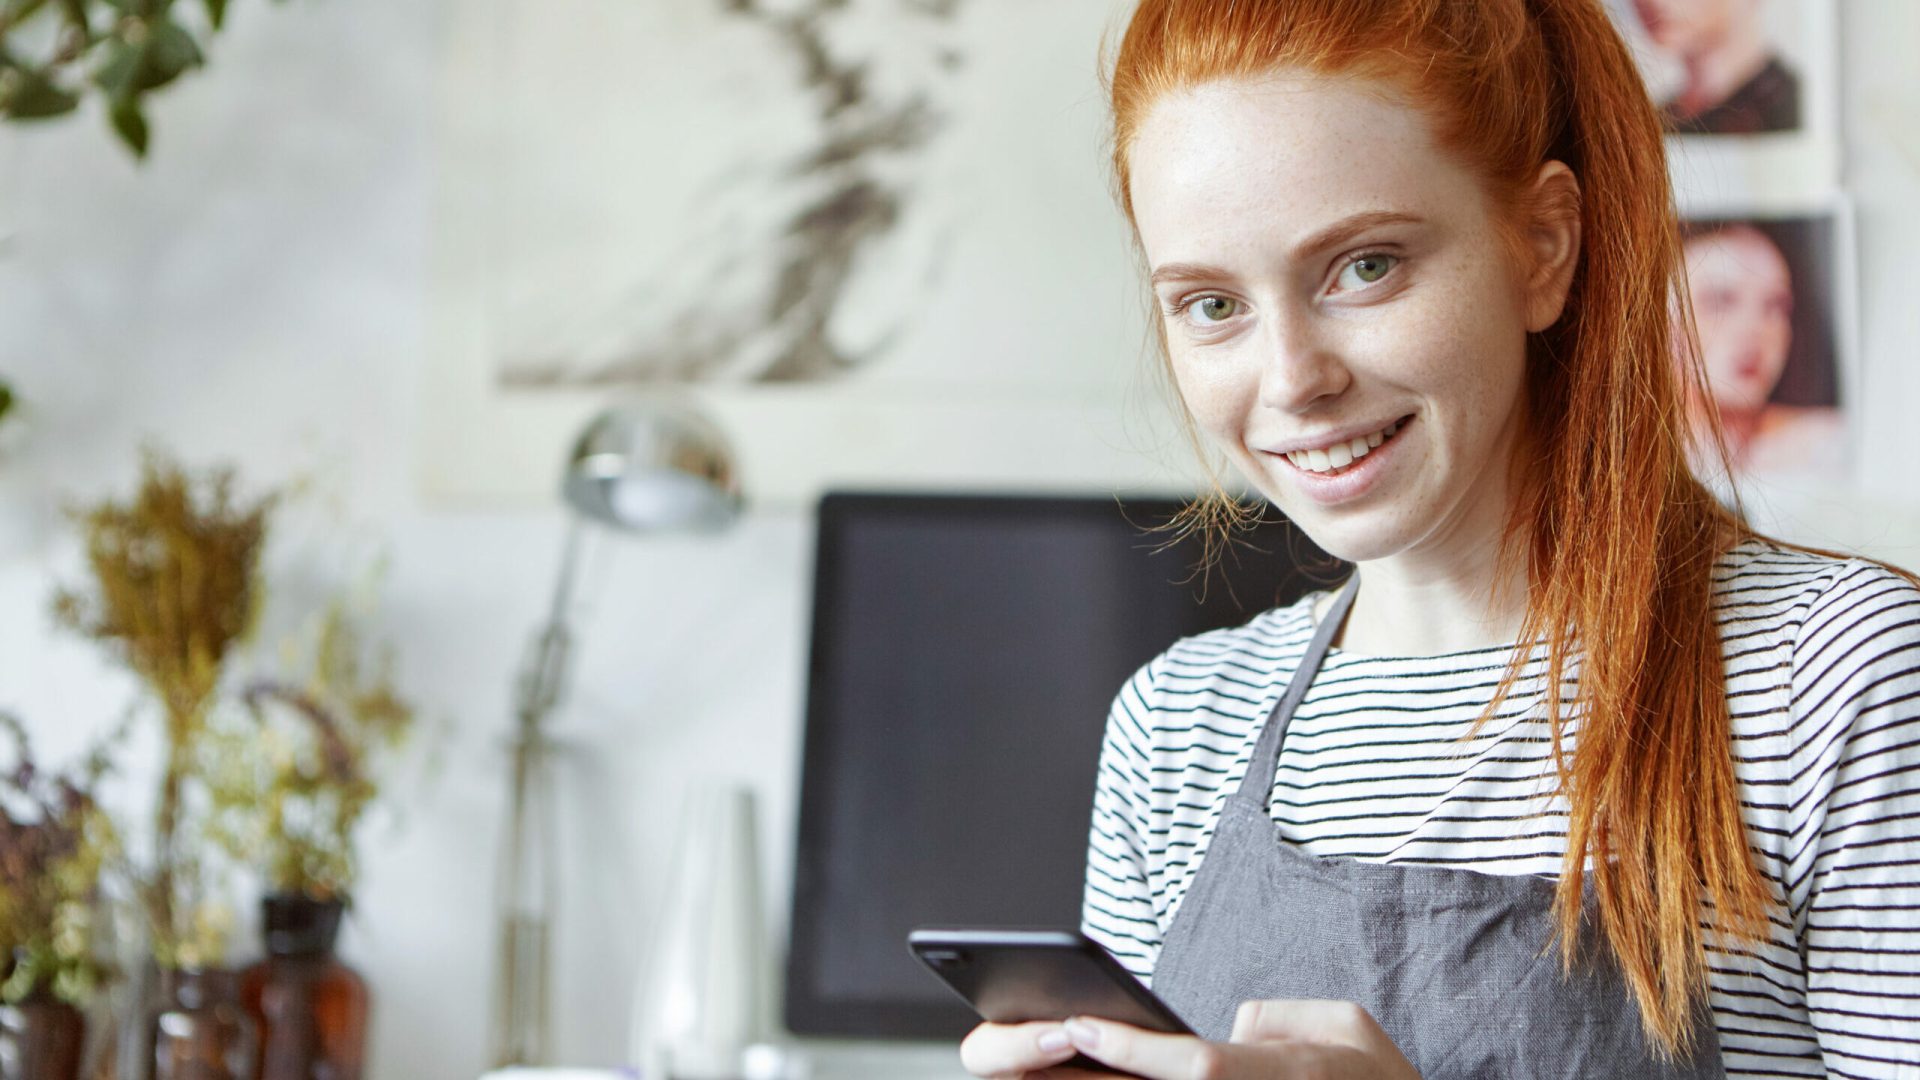 Close up portrait of cheerful cute young woman of creative occupation wearing her long ginger hair in ponytail typing text message using her mobile phone, looking and smiling broadly at camera